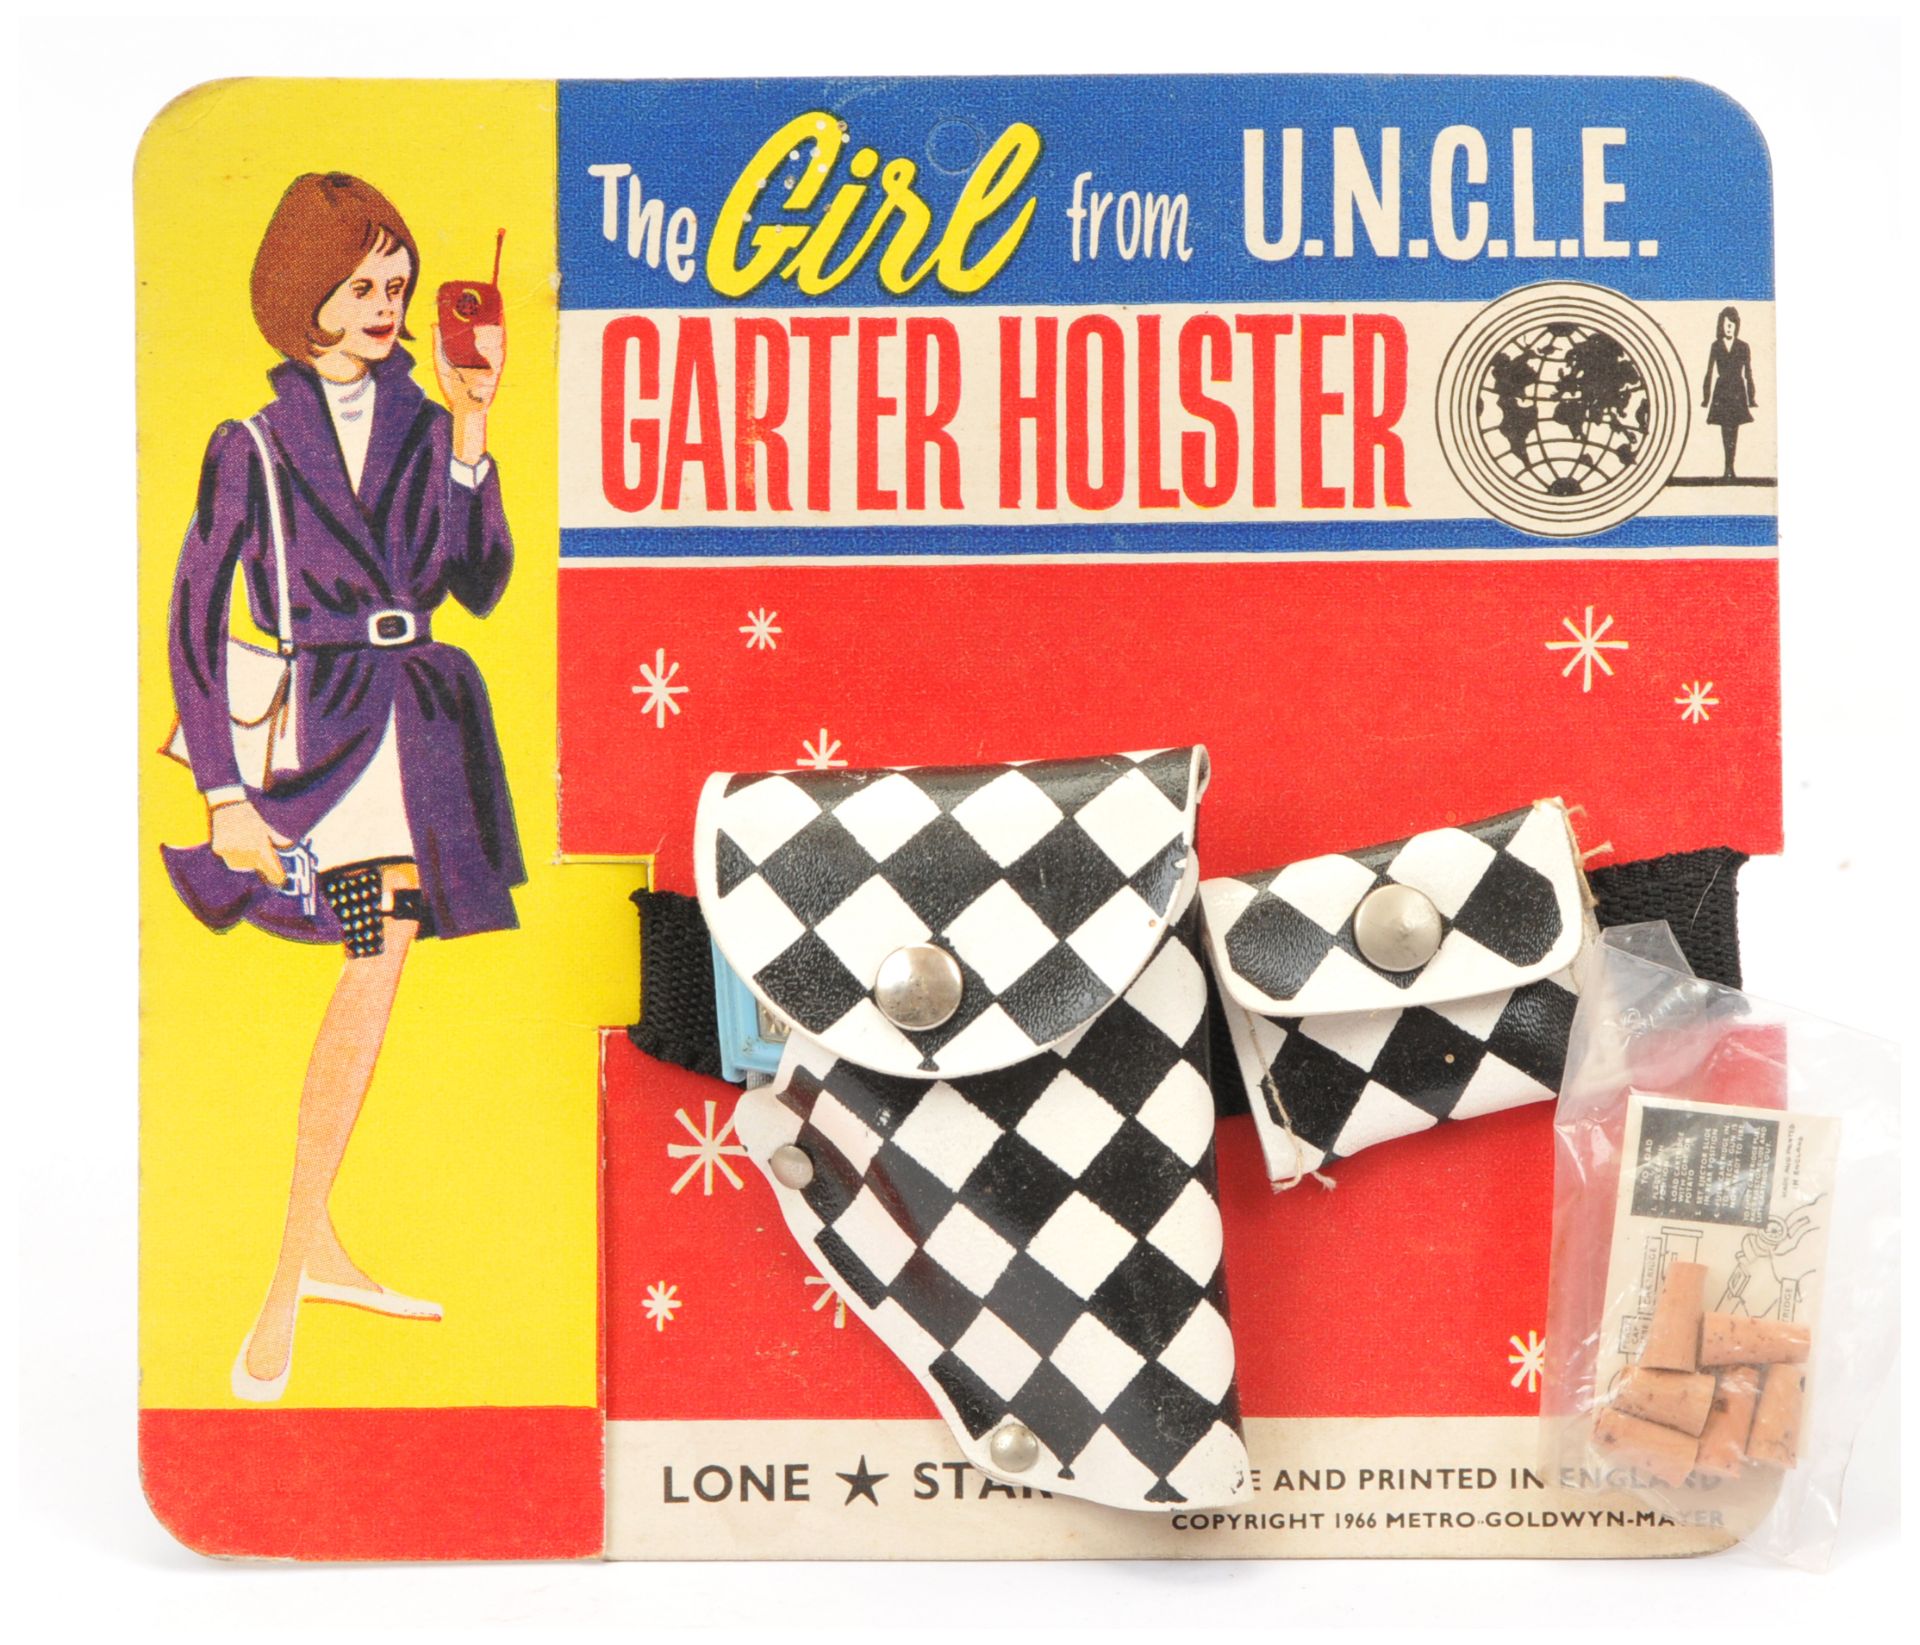 Lone Star vintage The Girl from UN.C.L.E. Garter Holster